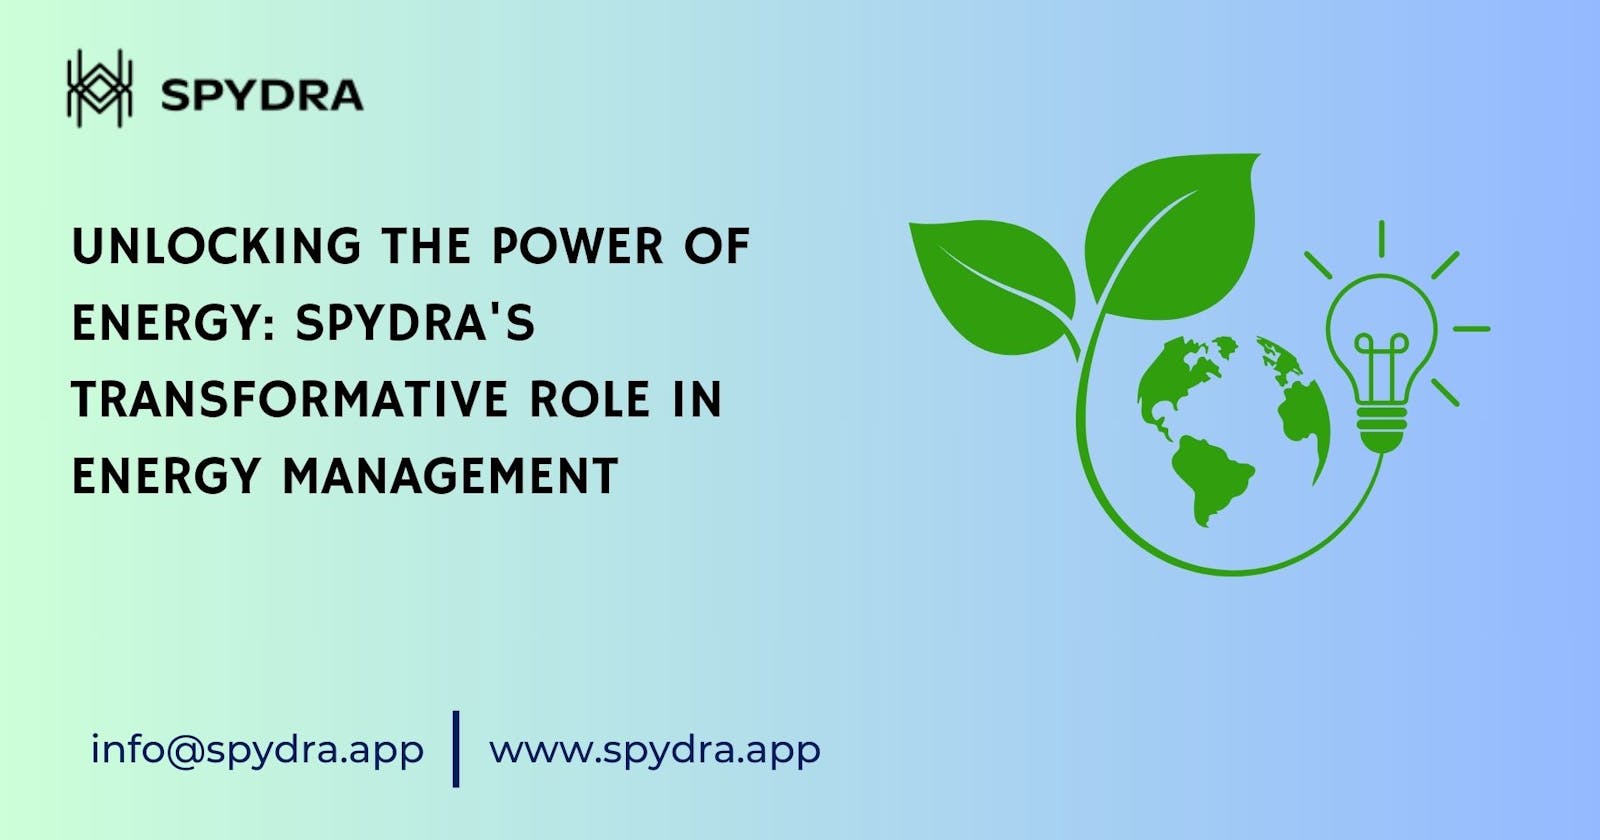 Unlocking the Power of Energy: Spydra's Transformative Role in Energy Management